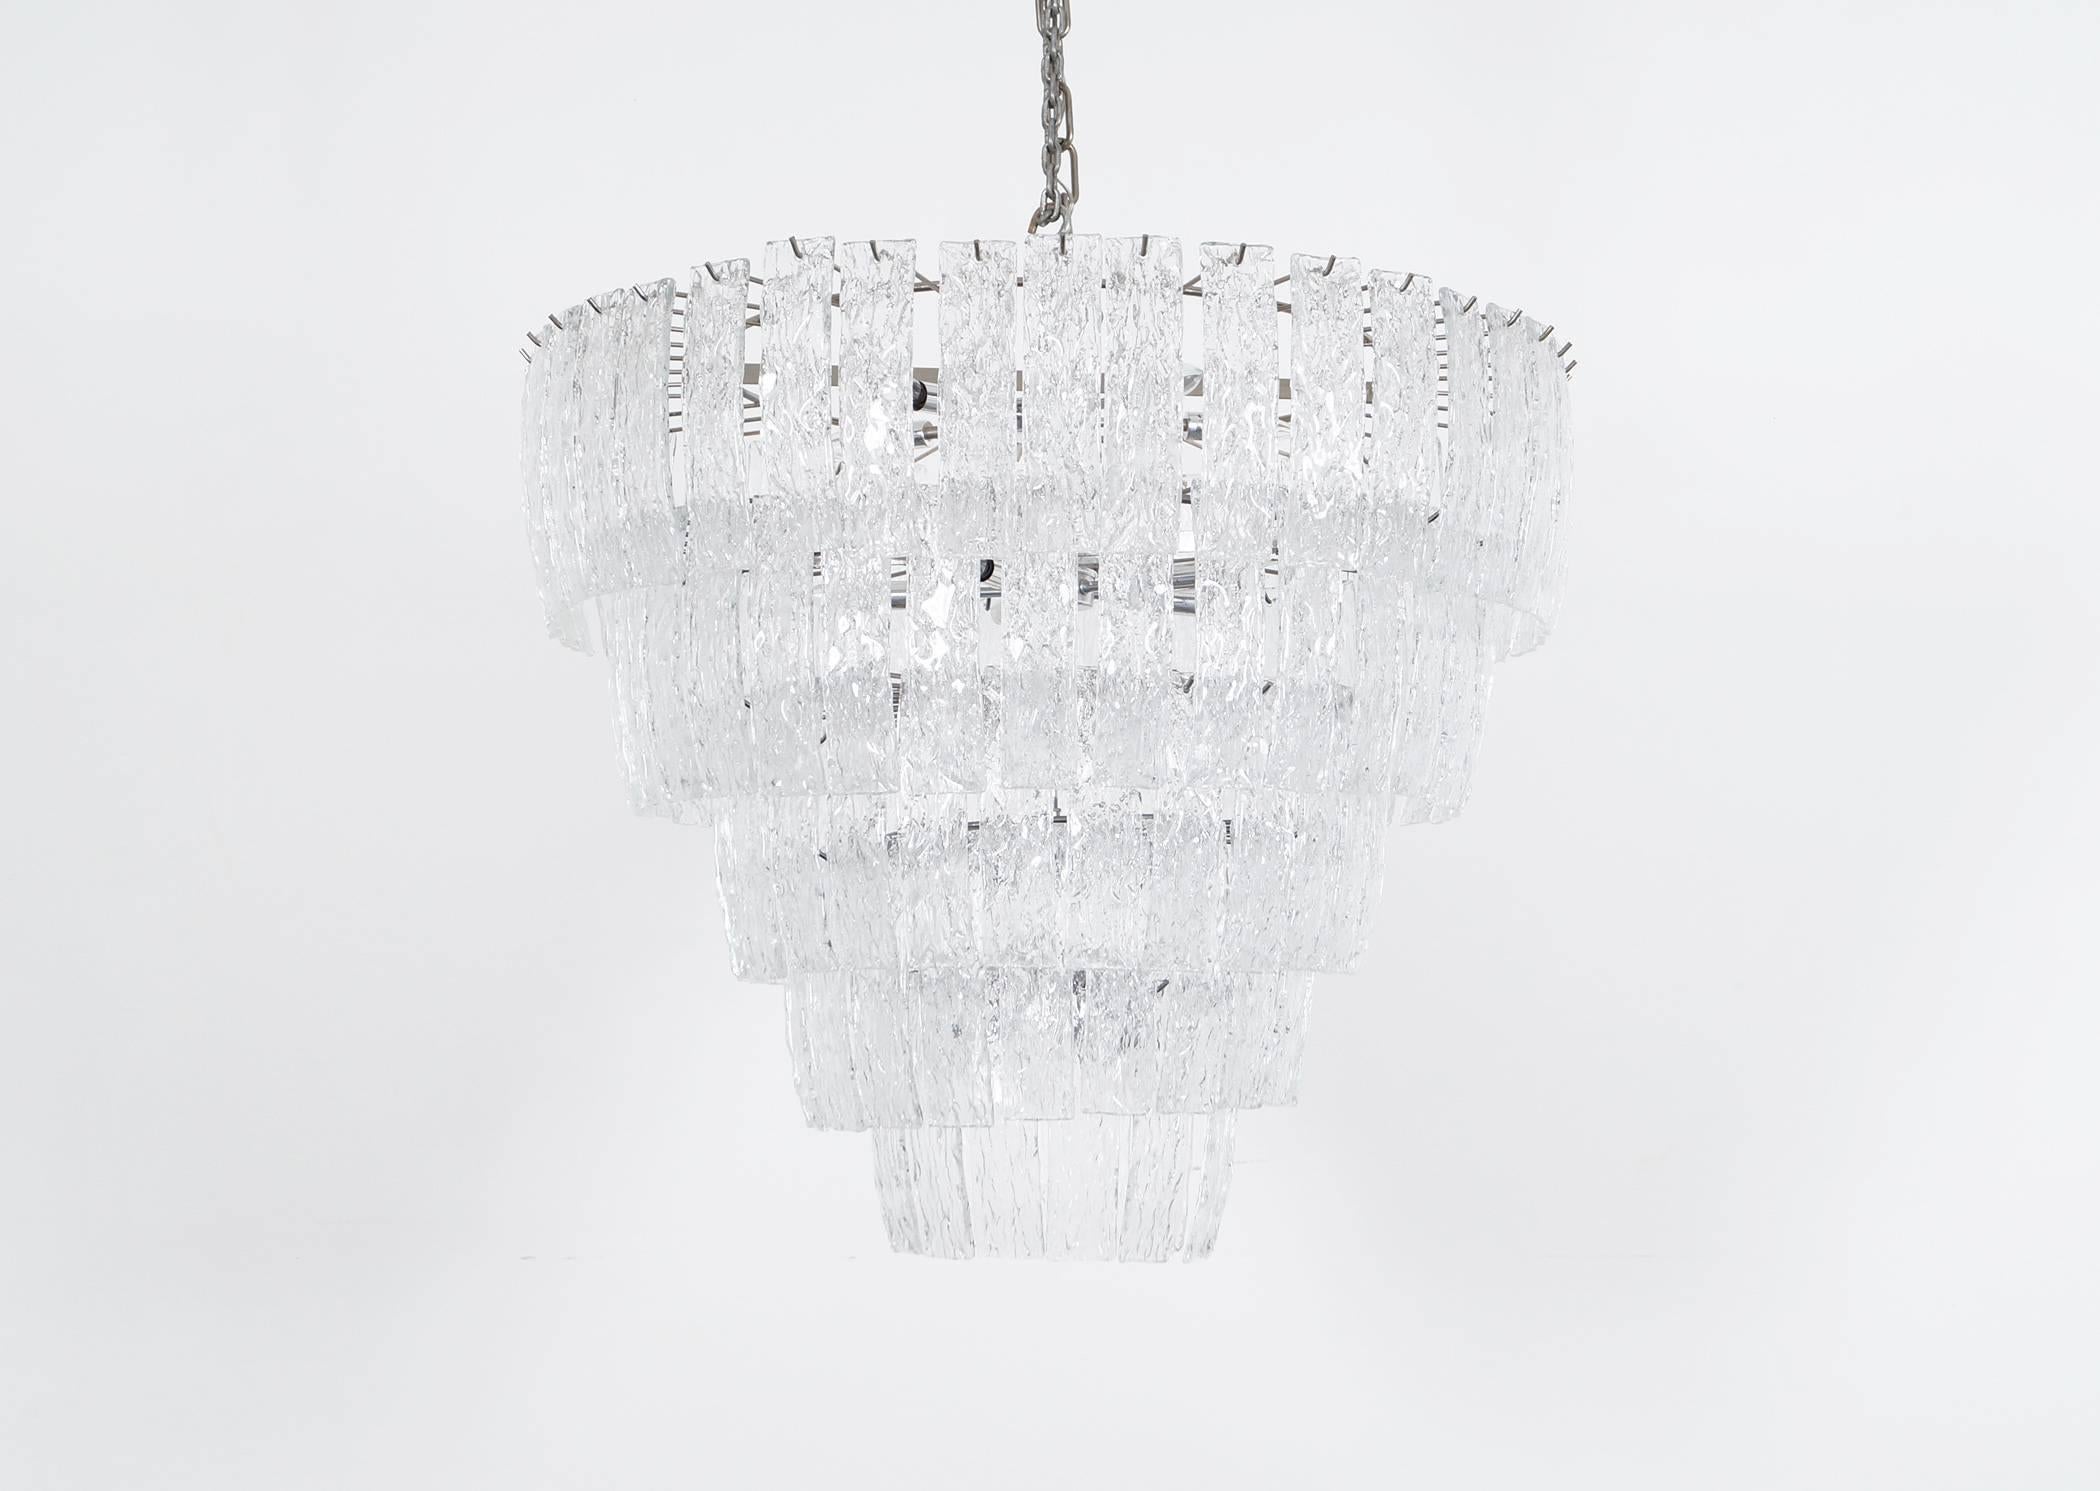 Large five-tiered Murano glass chandelier. Made in Italy. Each curved glass is handblown and measures 9.5